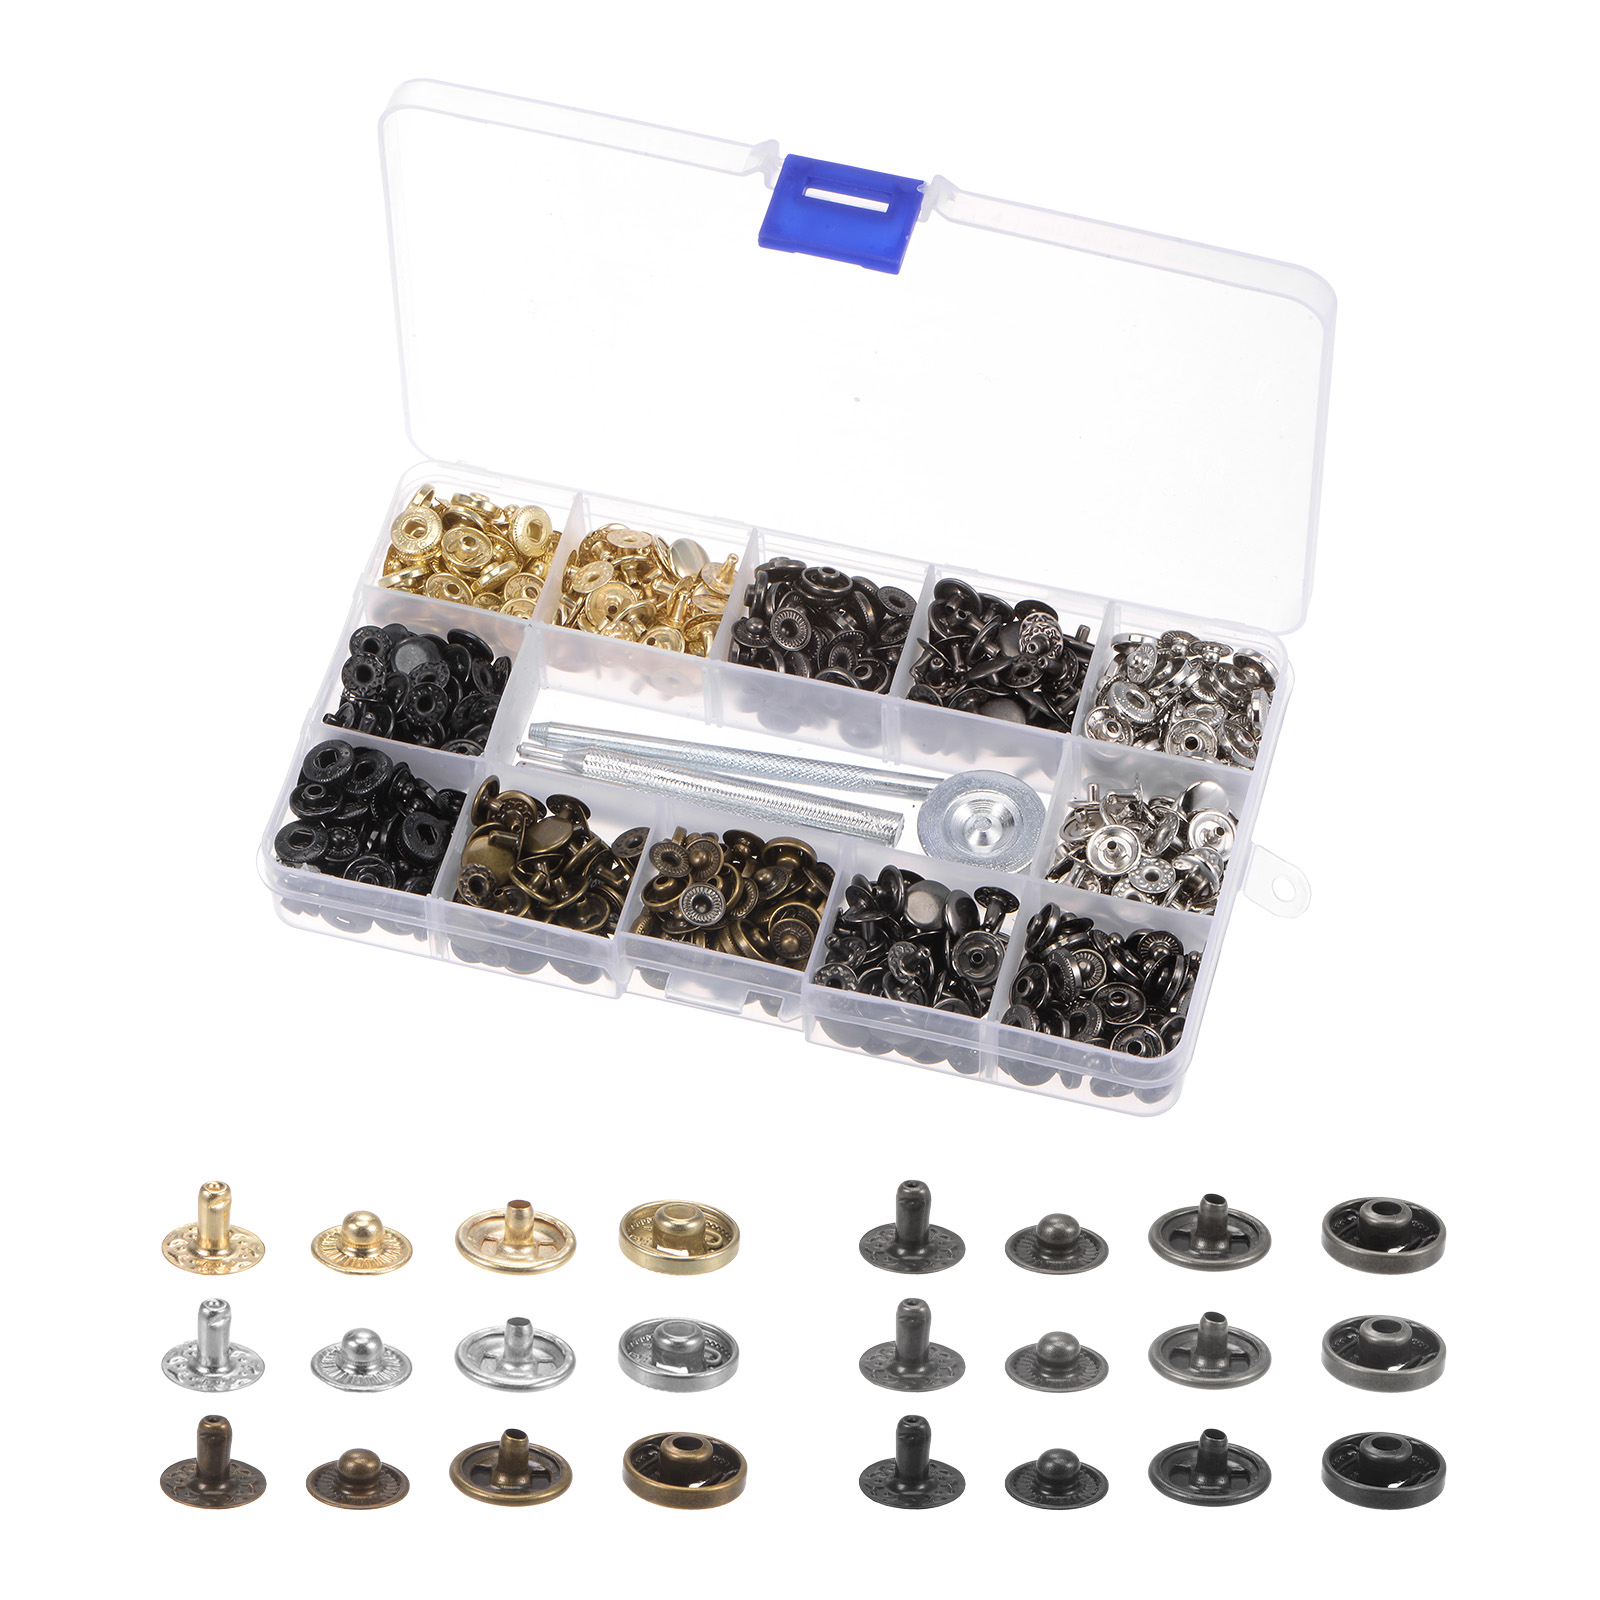 Unique Bargains 180 Sets Snap Fasteners Kit 6 Colors with 4 Setter Tools & Box for Clothing